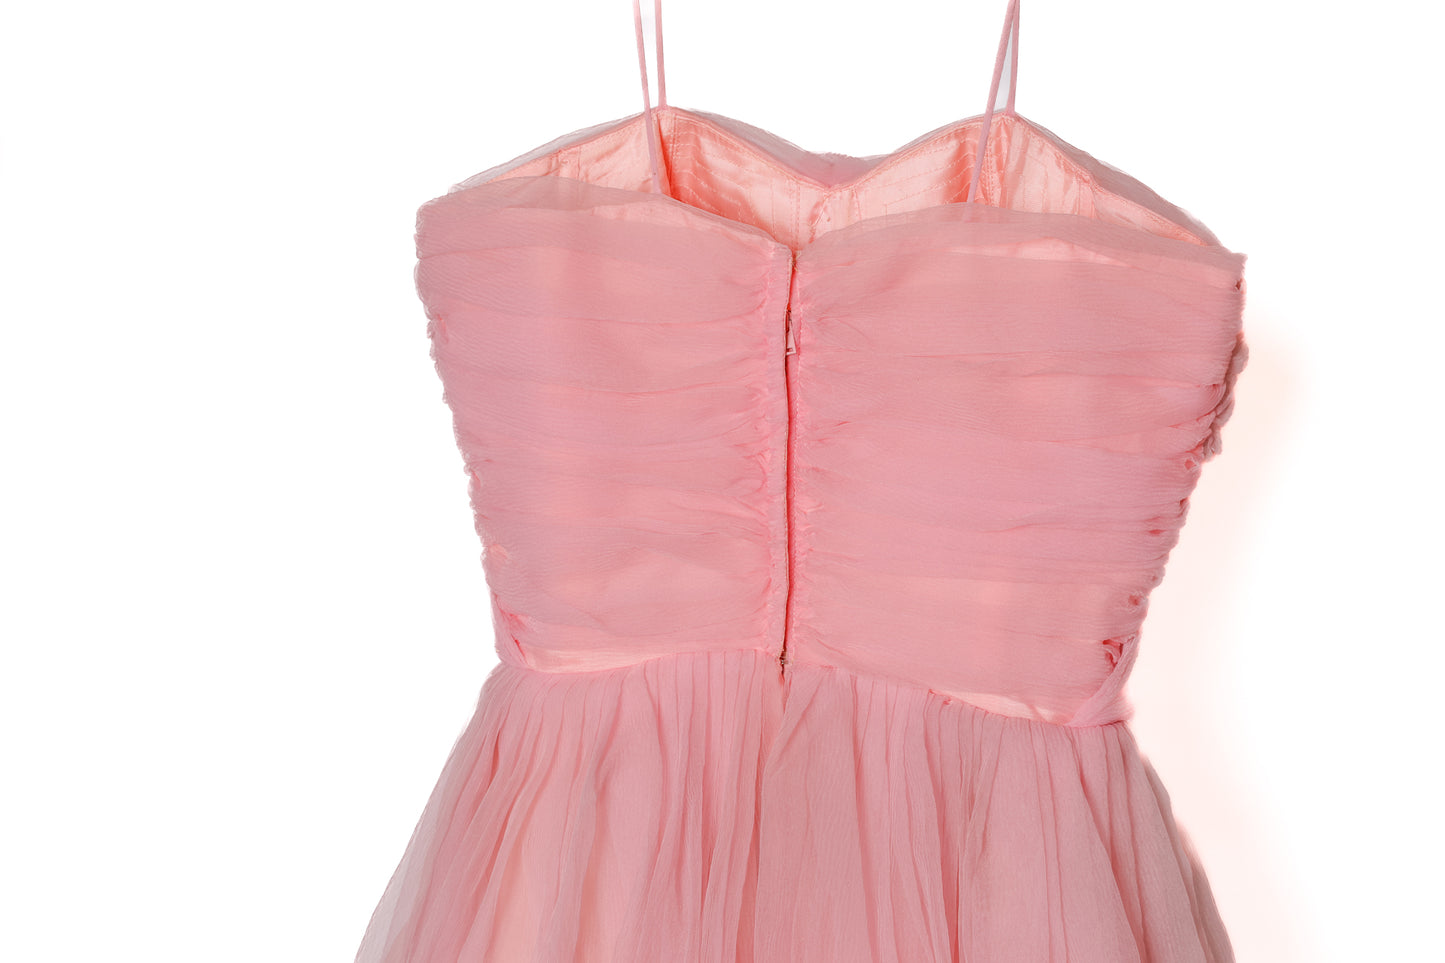 1950's Pink Fit and Flare Party Dress